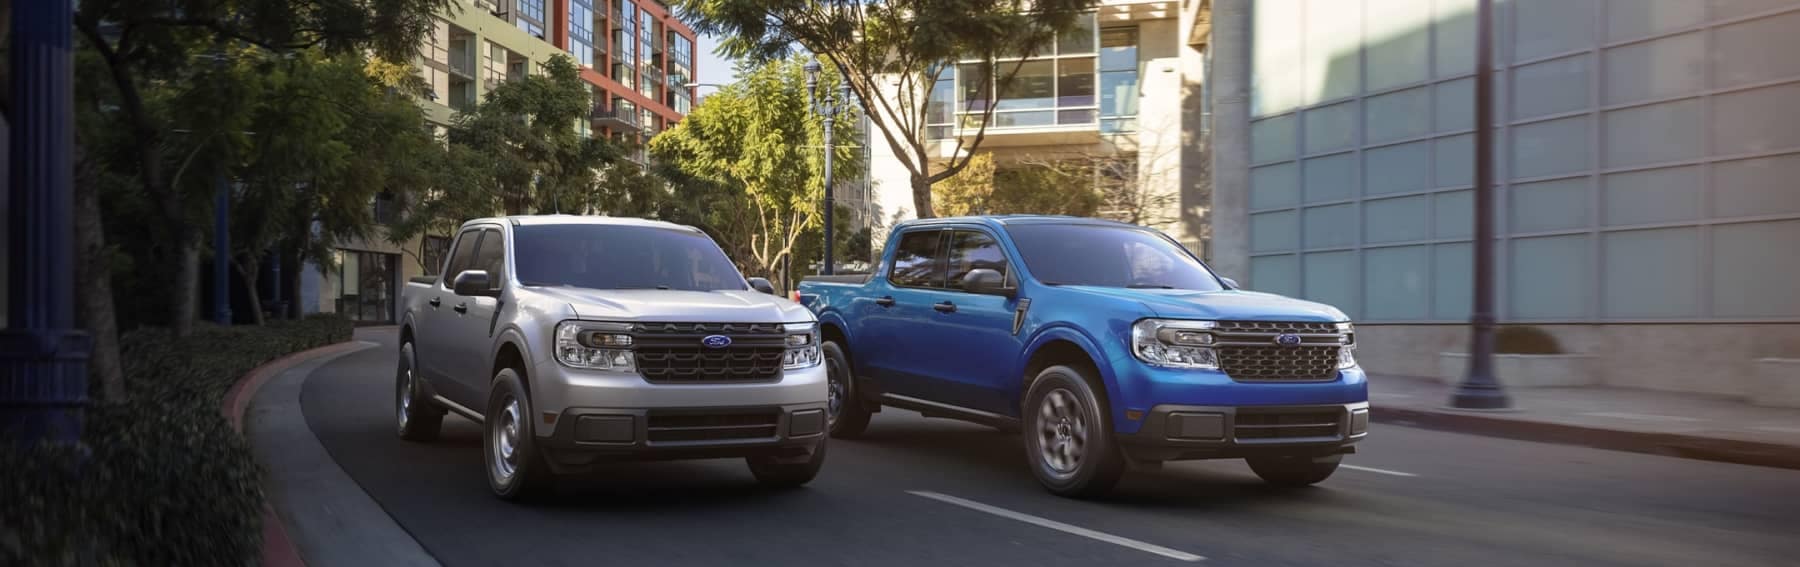 A silver and a blue Ford Truck driving down a city street mobile